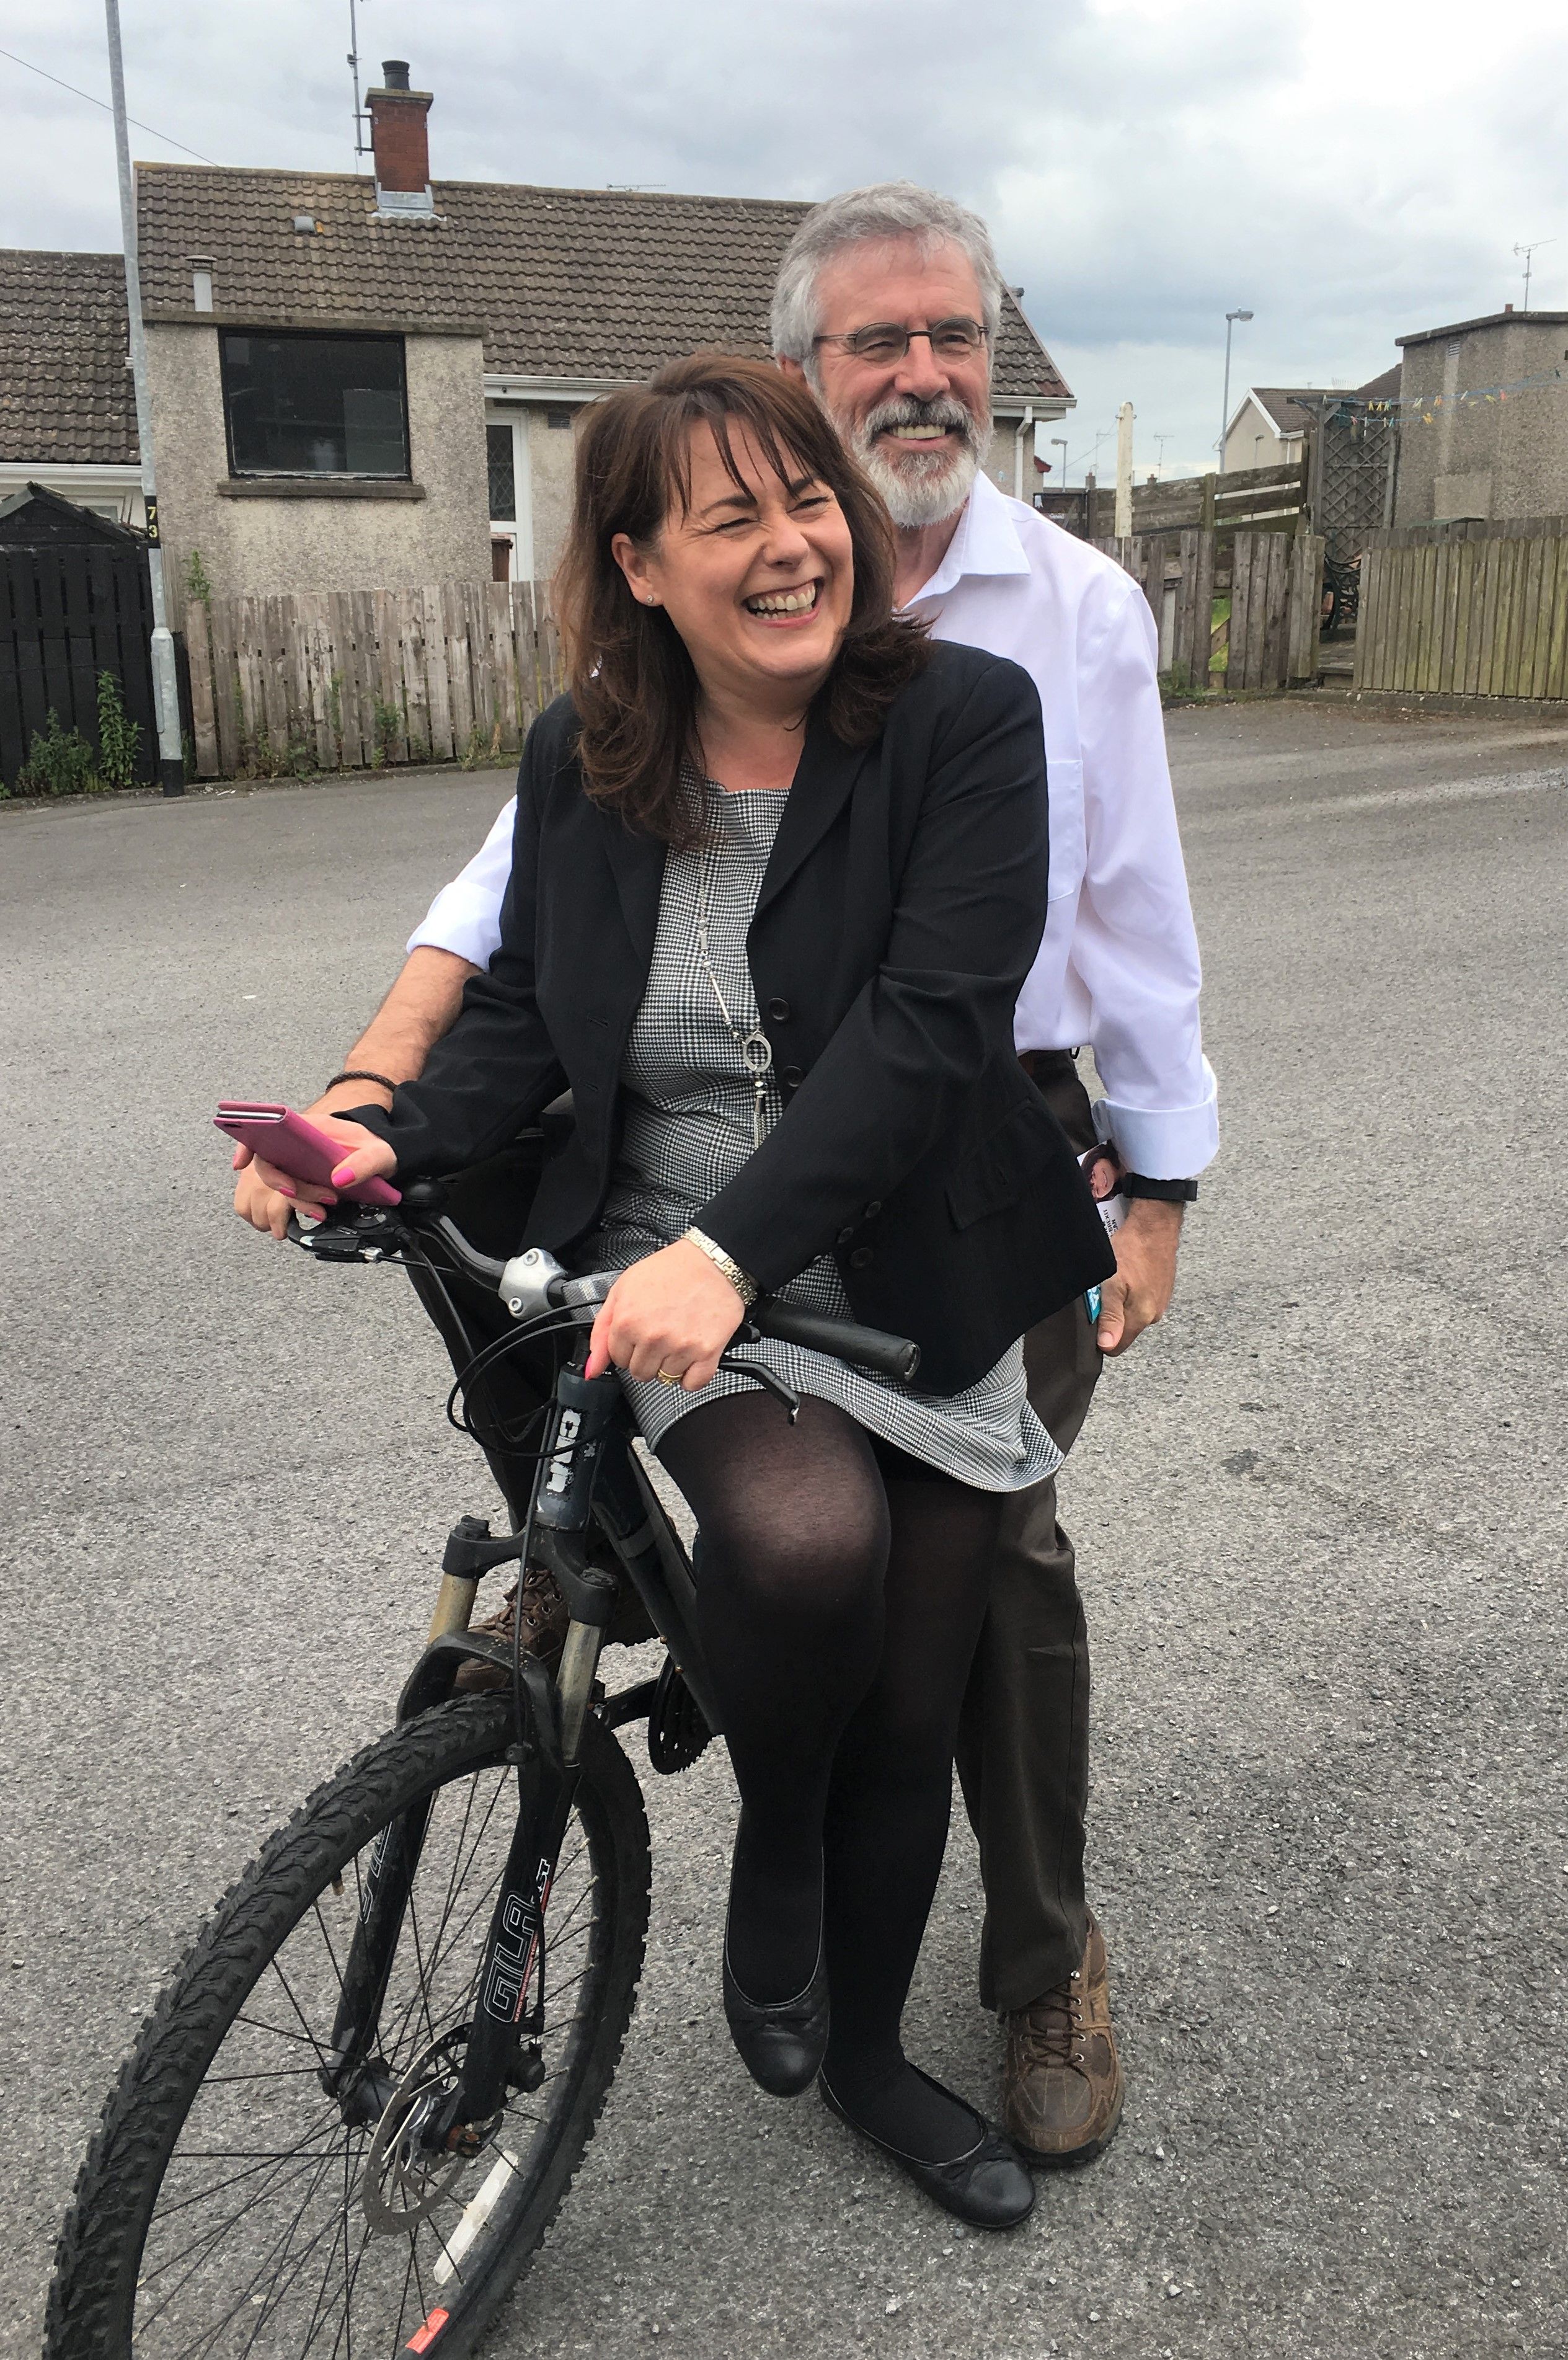 IN THE SADDLE: Gerry Adams with party colleague Michelle Gildernew during his cycling days